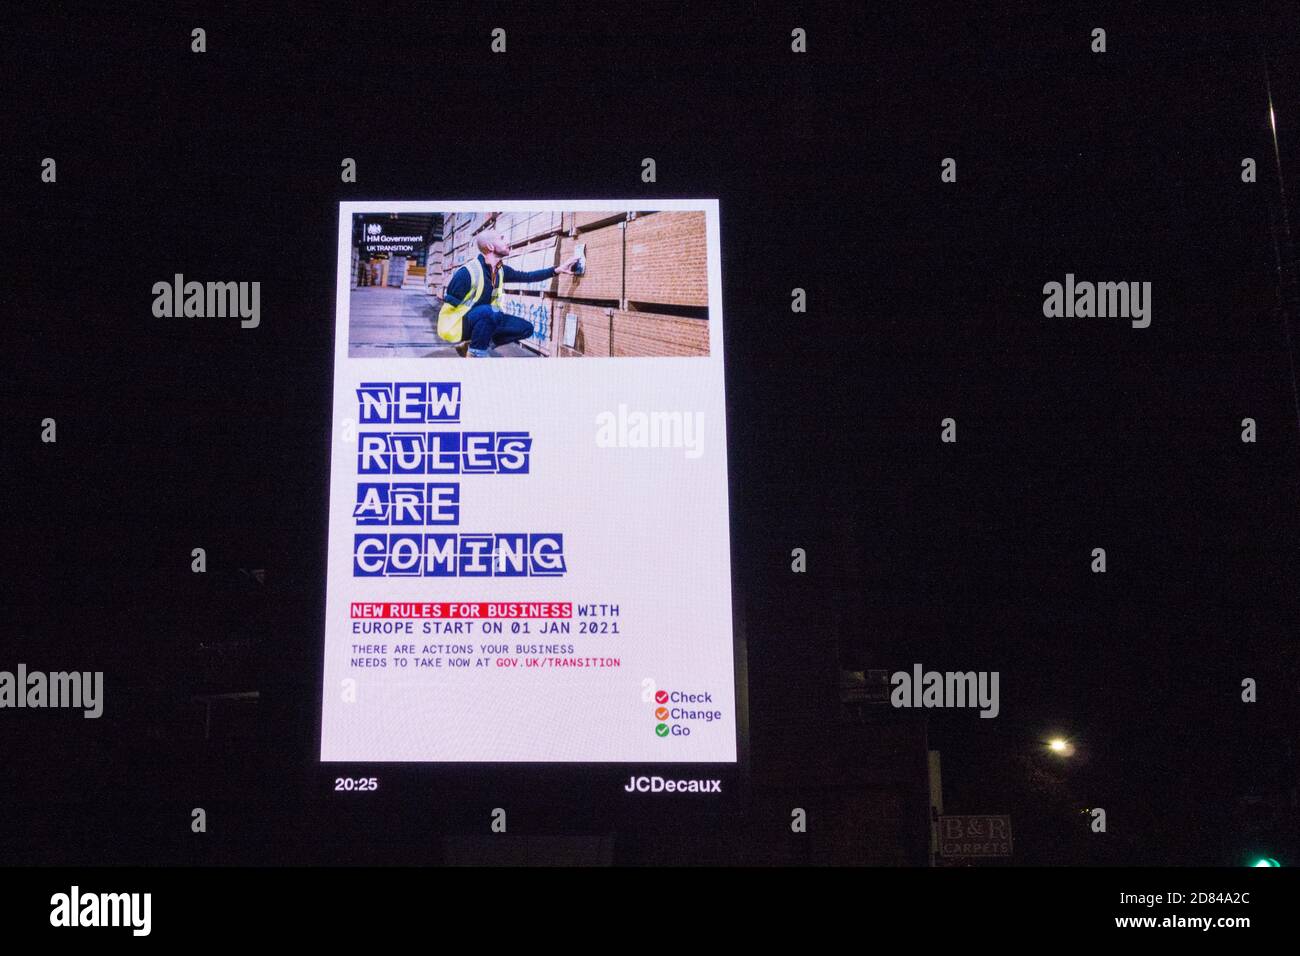 HM Government, New Rules are Coming, Brexit electronic billboard advert in Putney, SW London, UK Stock Photo